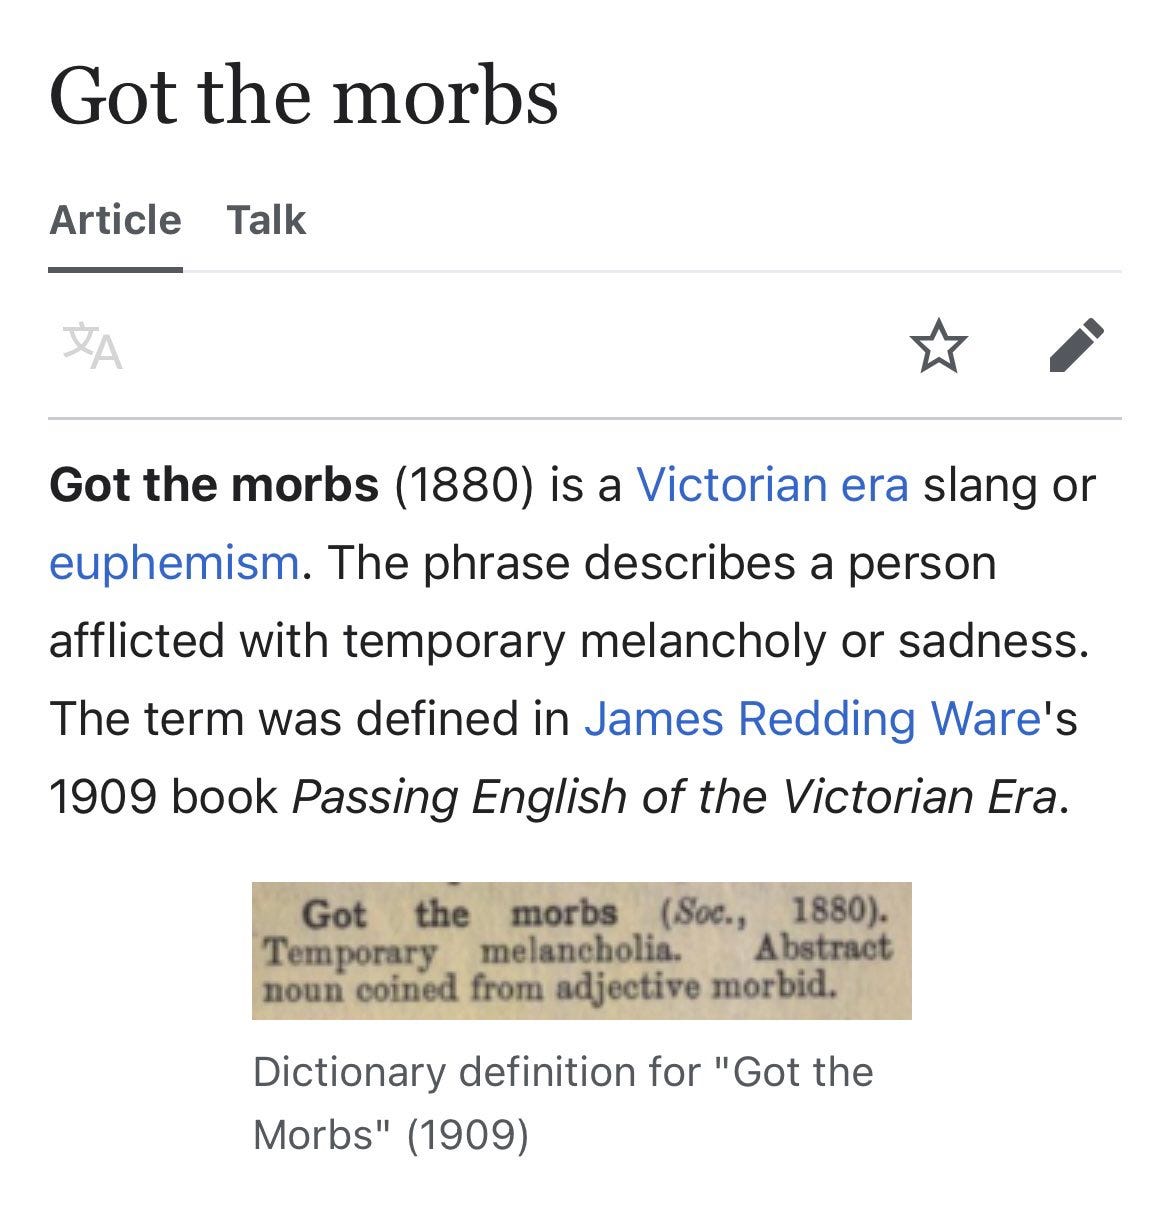 "Got the morbs" is a slang phrase or euphemism used in the Victorian era. The phrase describes a person afflicted with temporary melancholy or sadness. The term was defined in James Redding Ware's 1909 book Passing English of the Victorian Era.